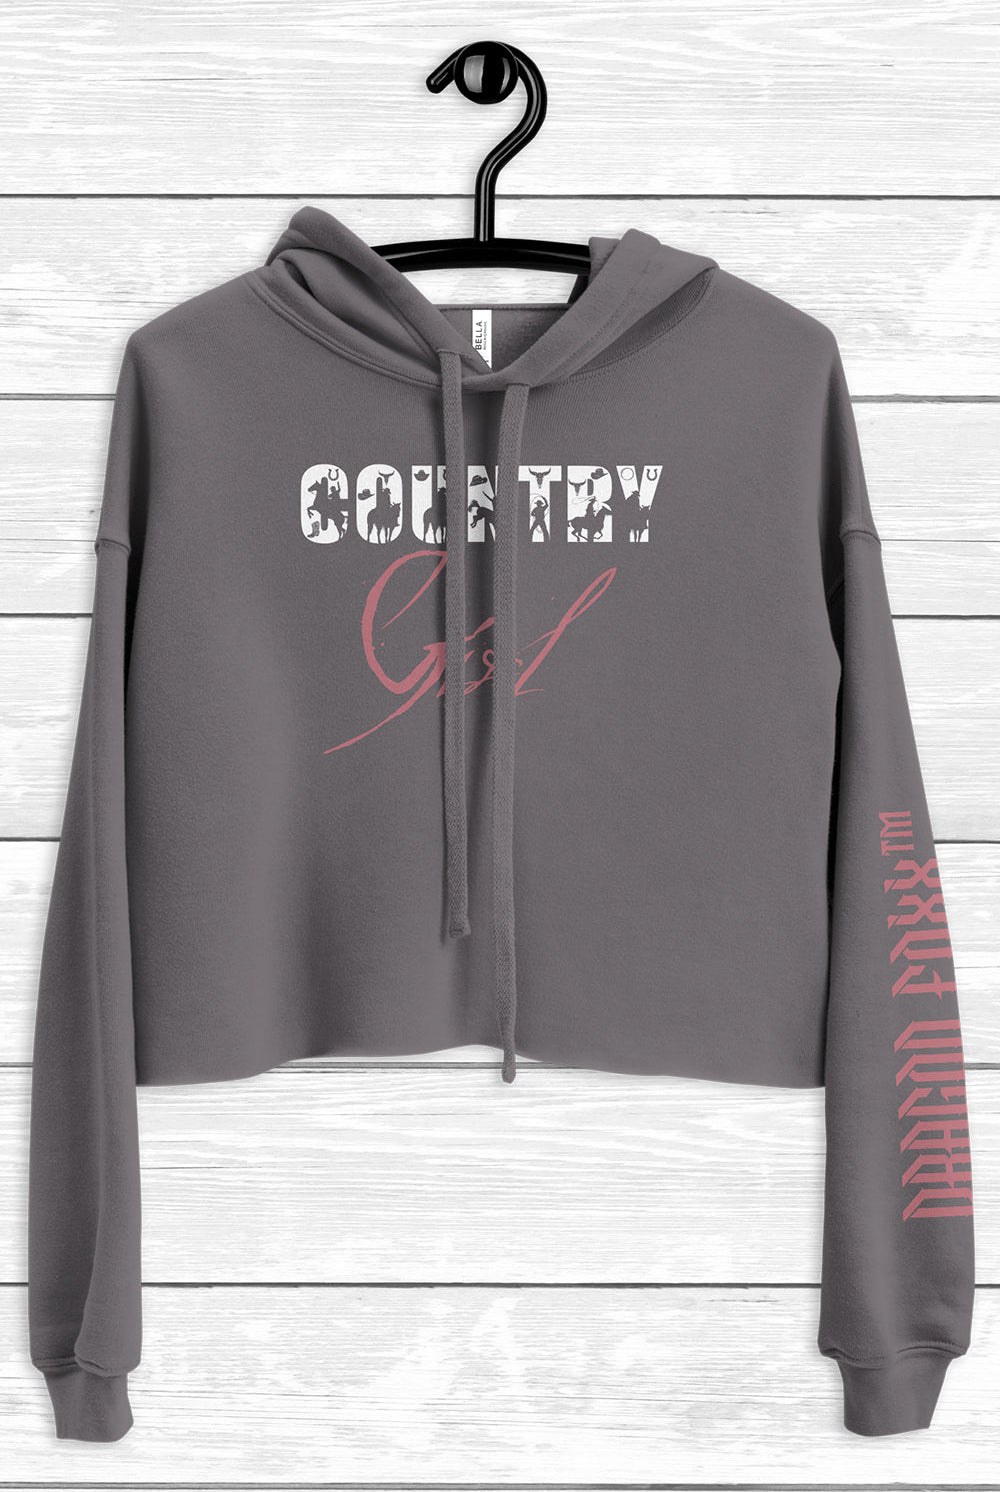 COUNTRY Girl - Nashville Music City Crop Hoodie - COUNTRY Girl - Nashville Music City Crop Hoodie - DRAGON FOXX™ - 8586252_9633 - Black - S - Crop Hoodie - Black Crop Hoodie - Black Hoodie - Country Girl